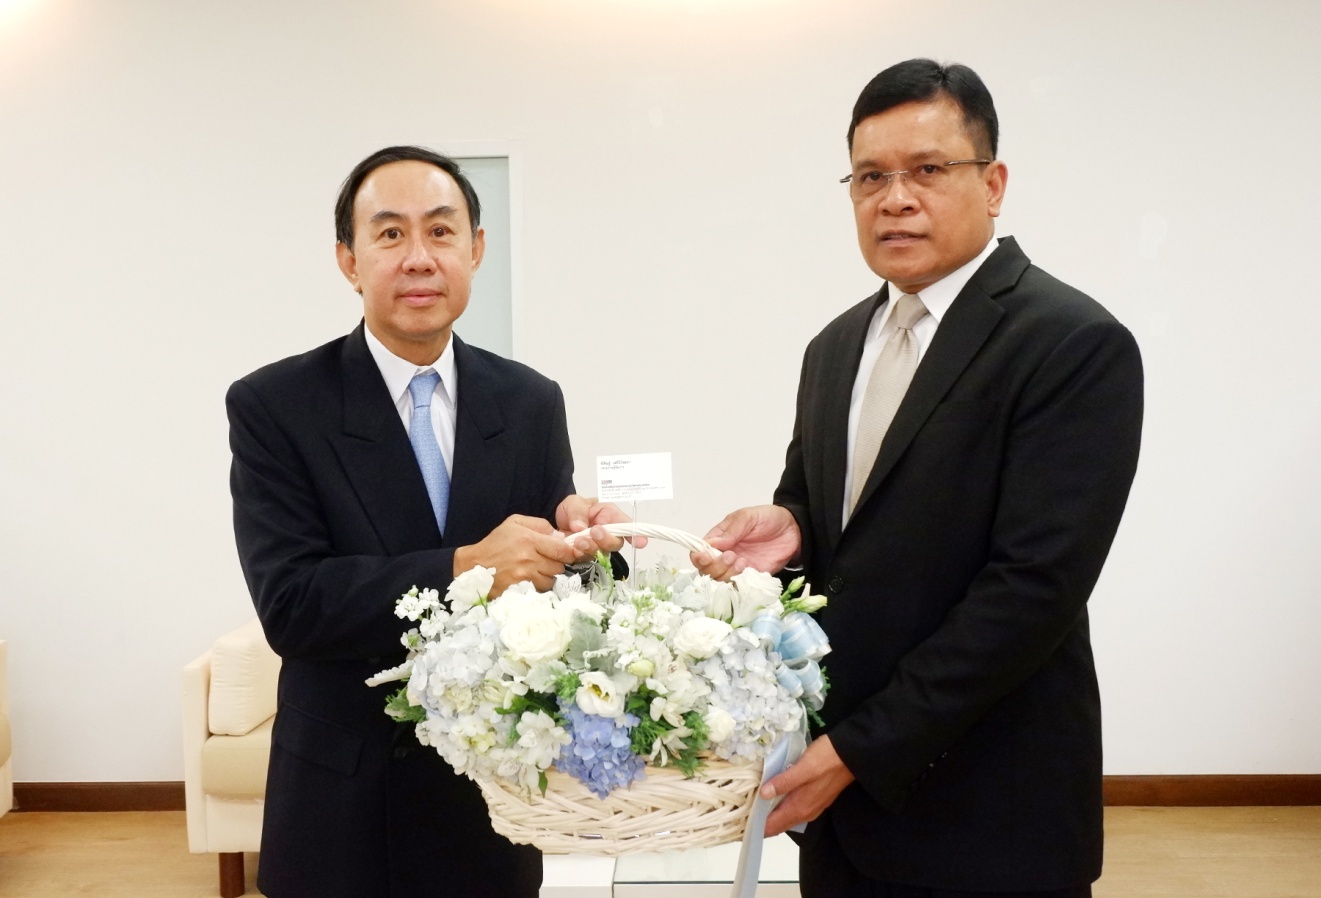 EXIM Thailand Congratulates New Director-General, State Enterprise Policy Office, Ministry of Finance